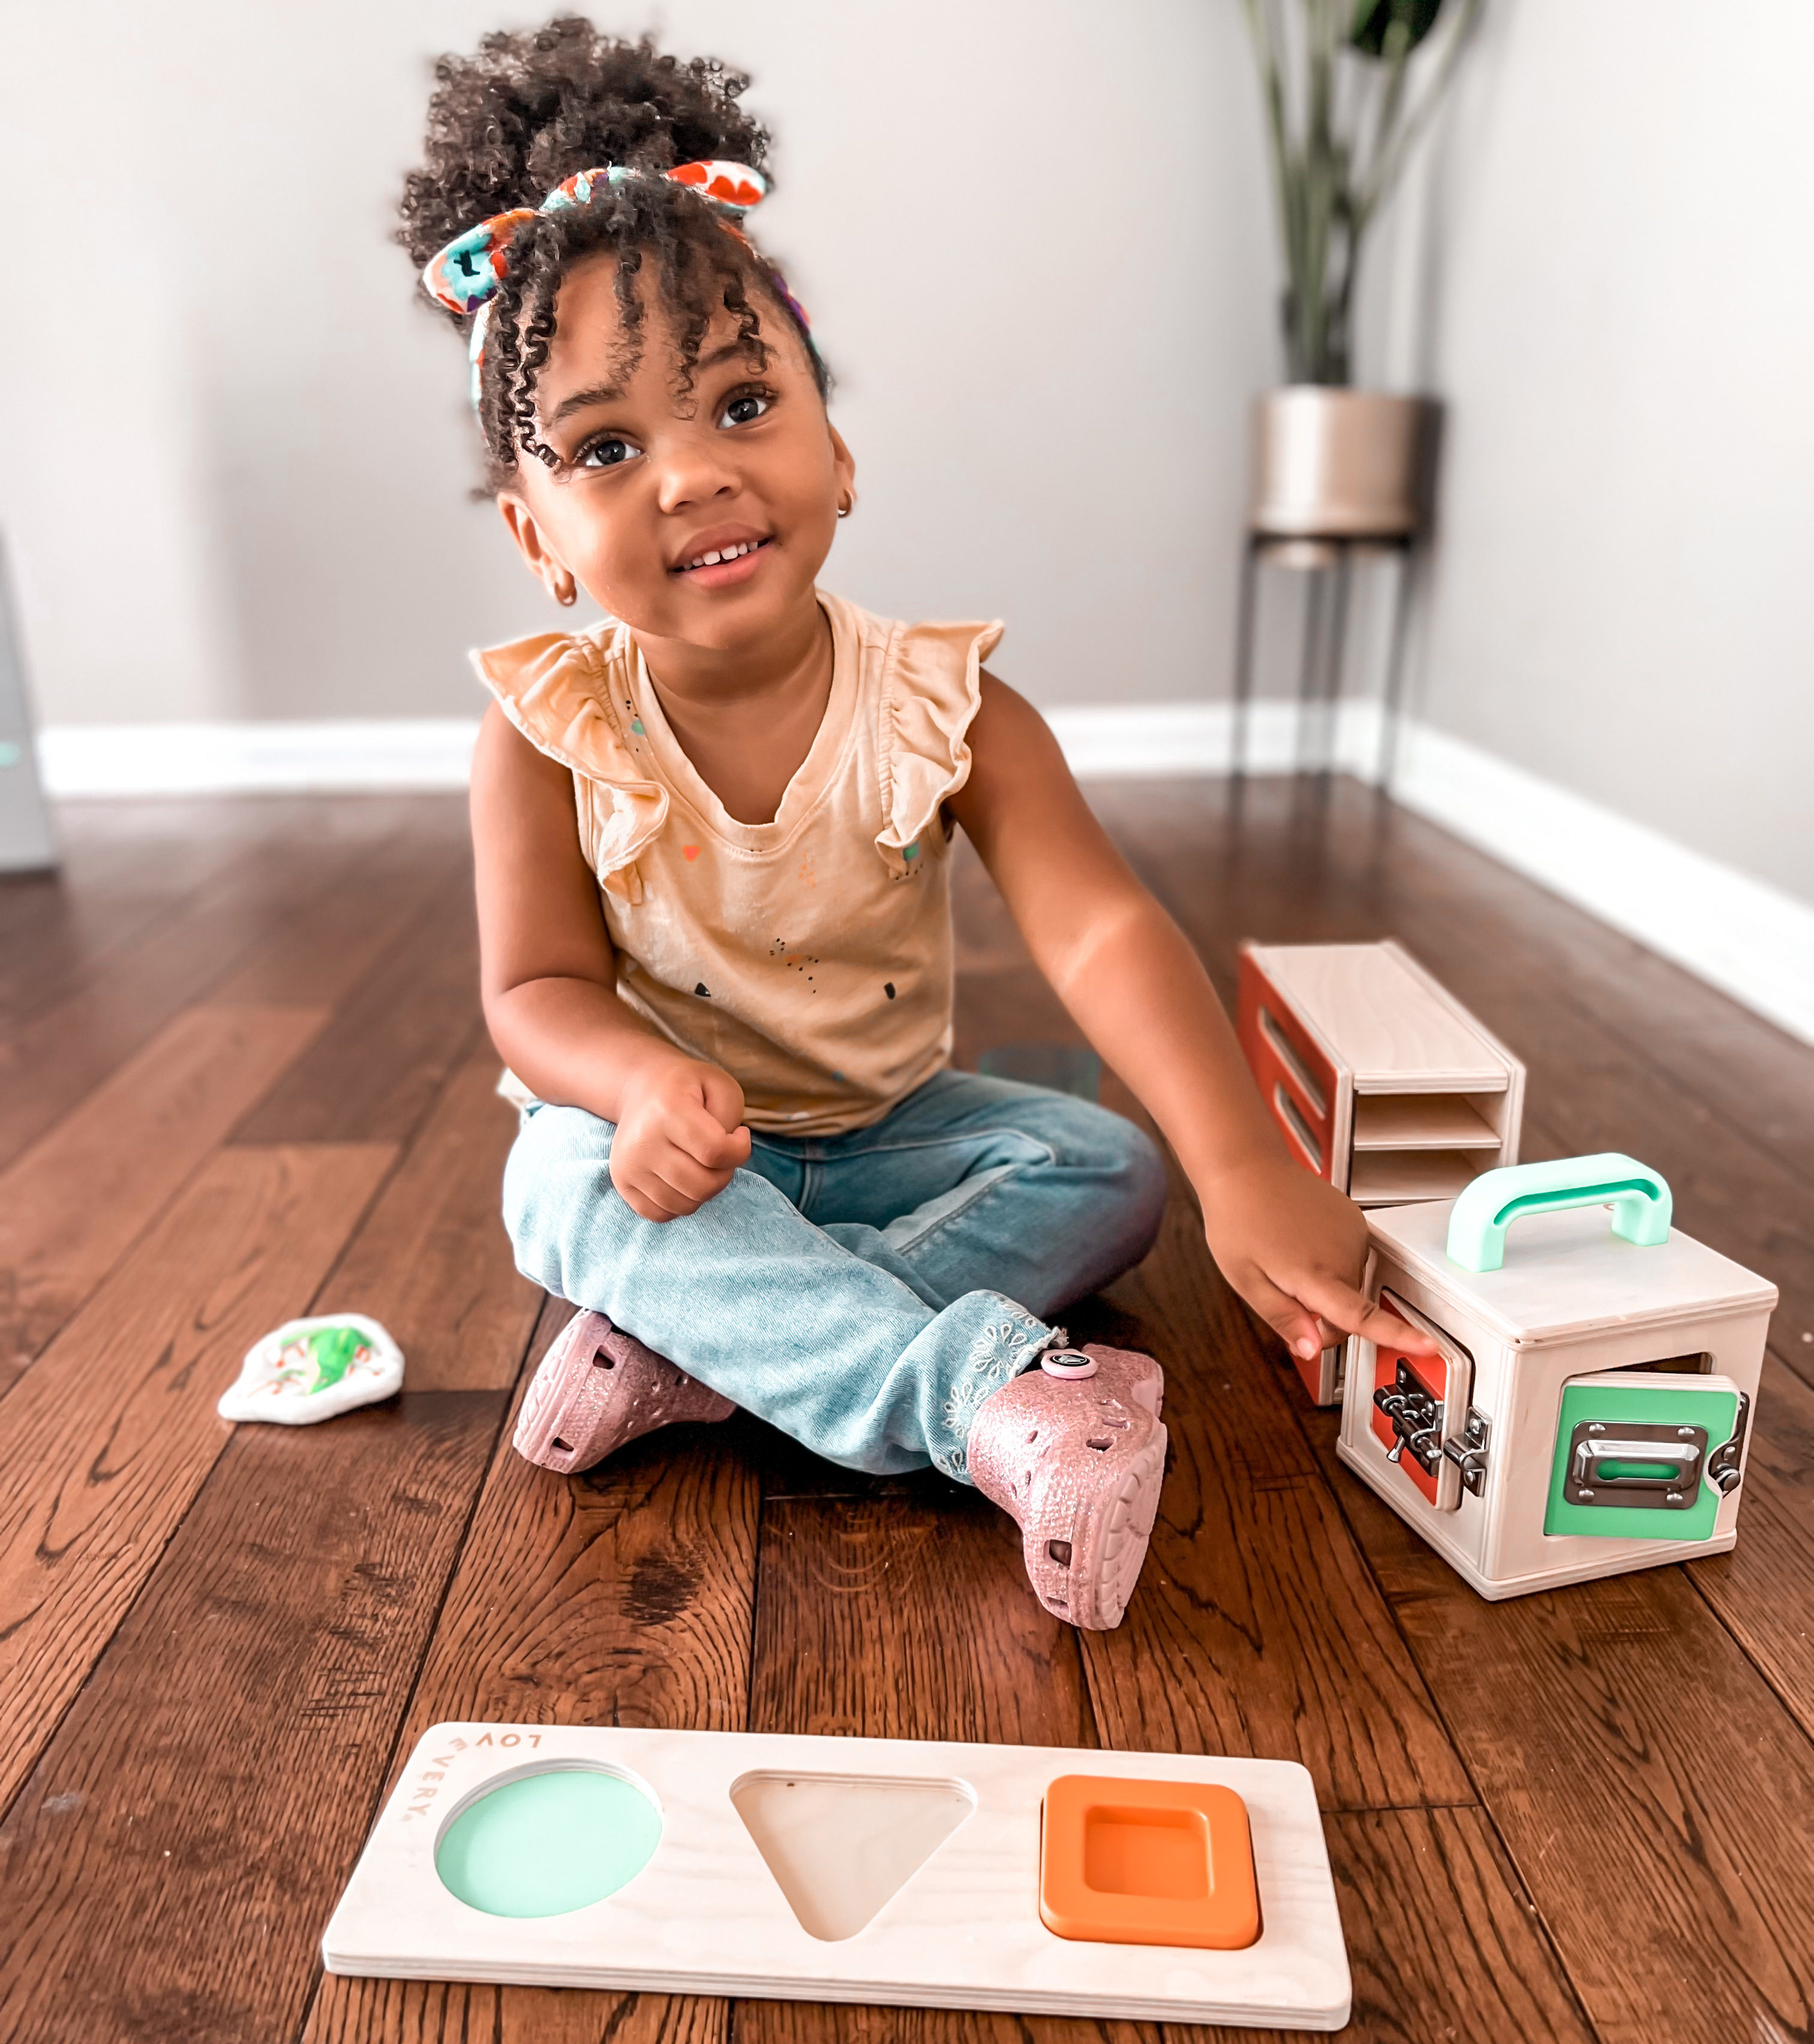 Baby Subscription Box - Lovevery Play Kits for Babies and Toddlers